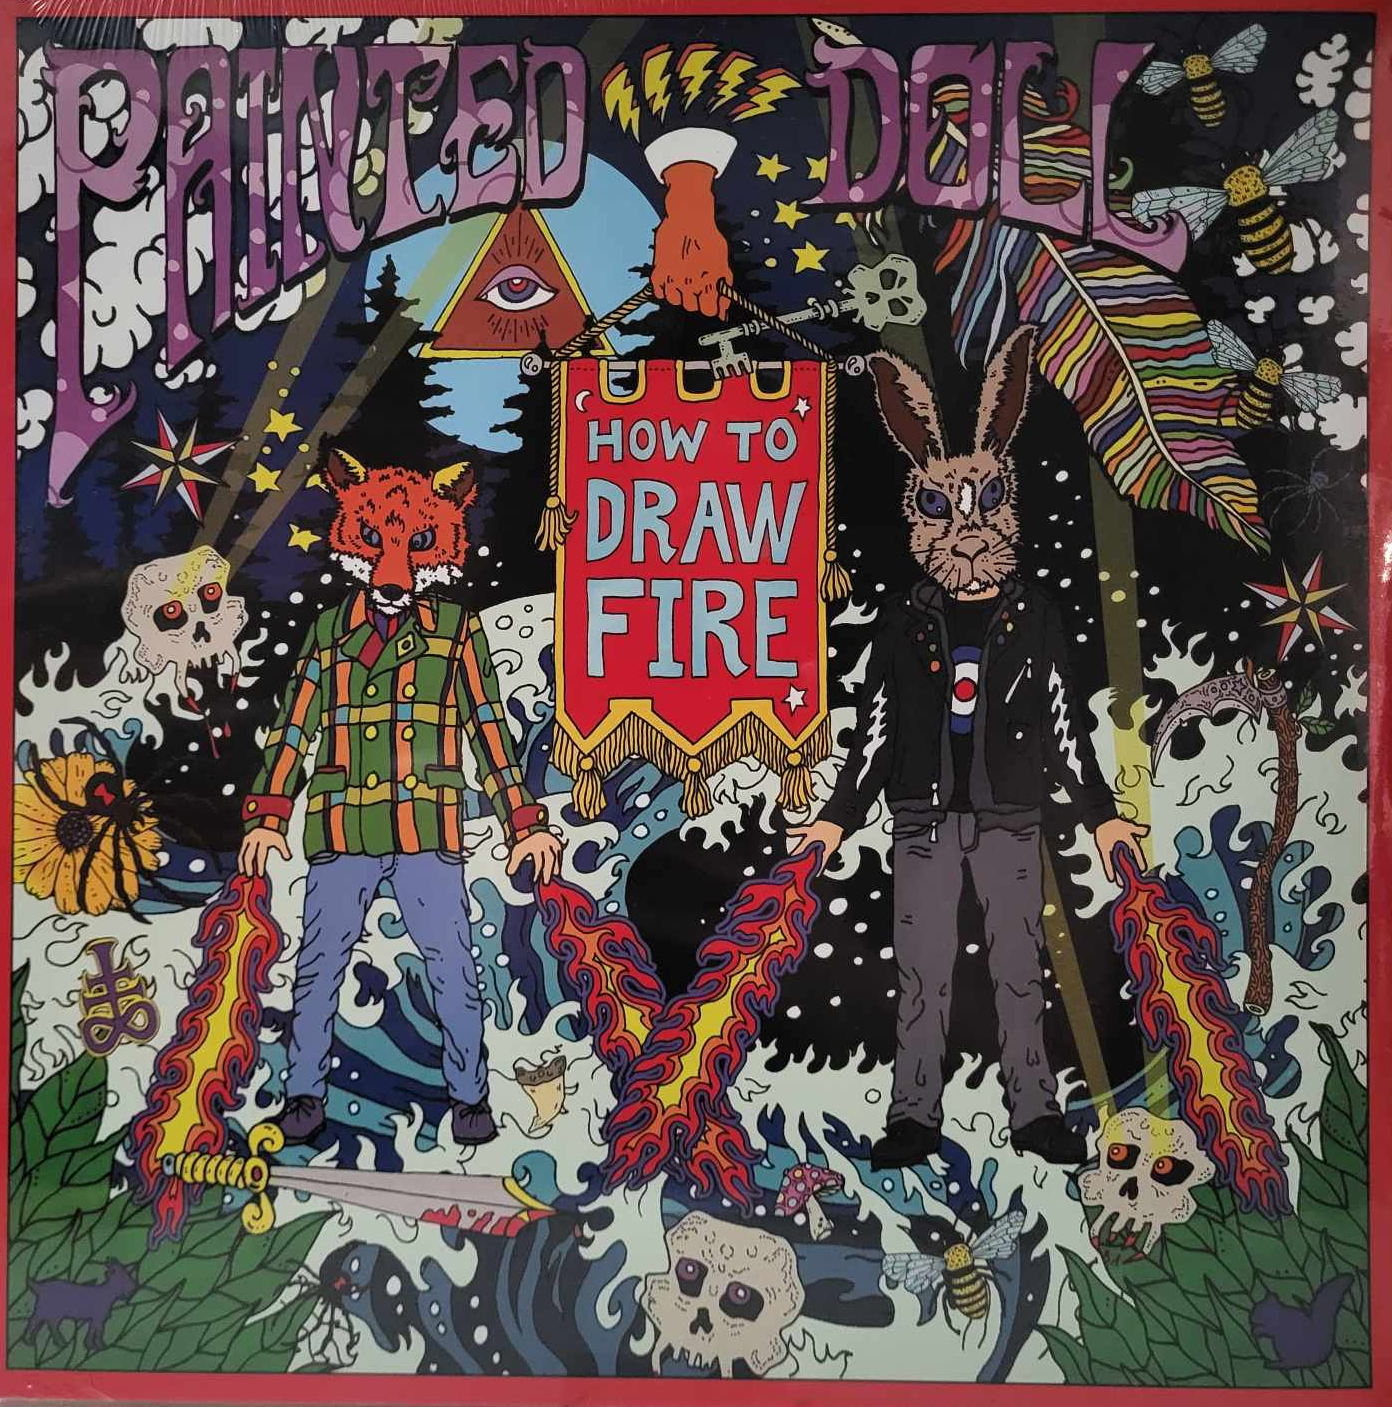 PAINTED DOLL - HOW TO DRAW FIRE